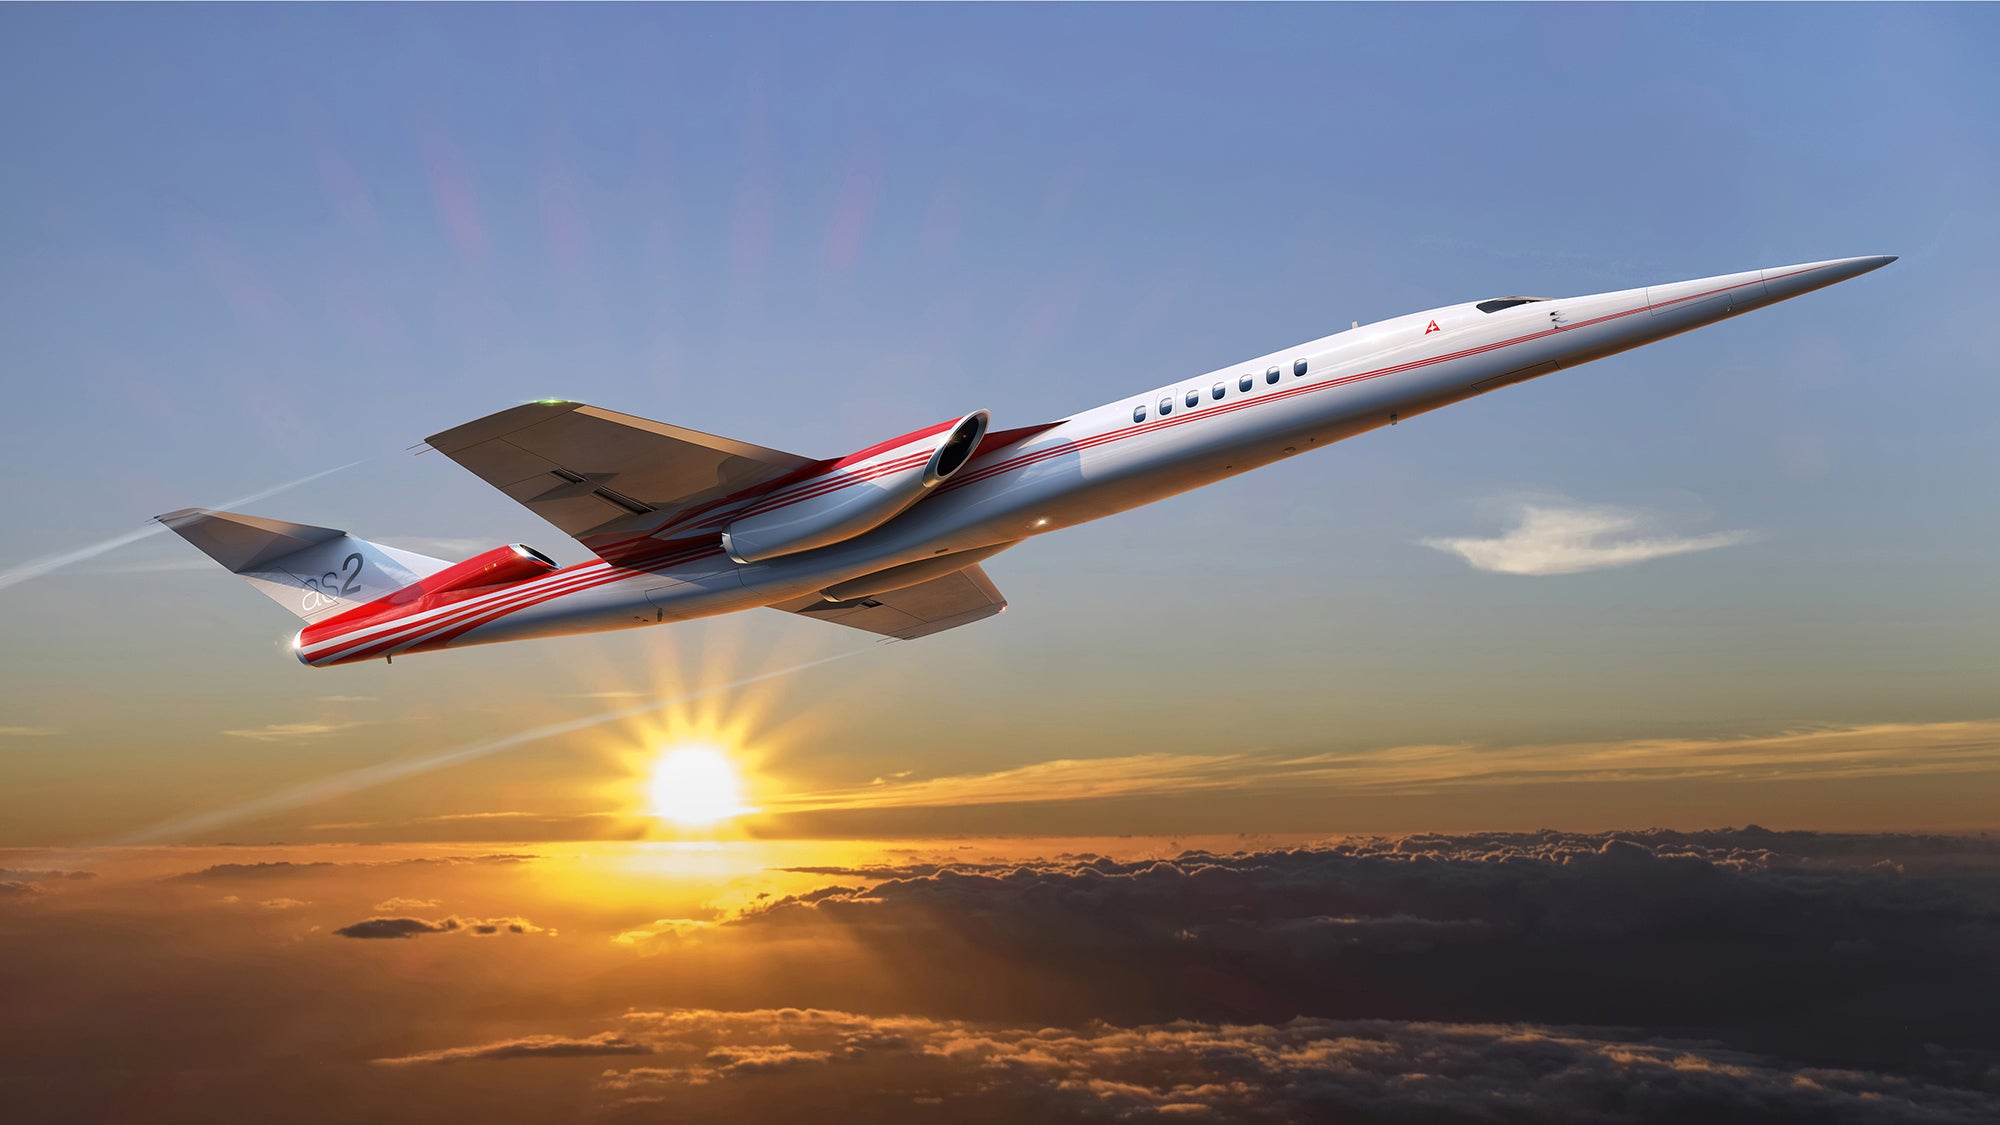 Aerion AS2 in flight